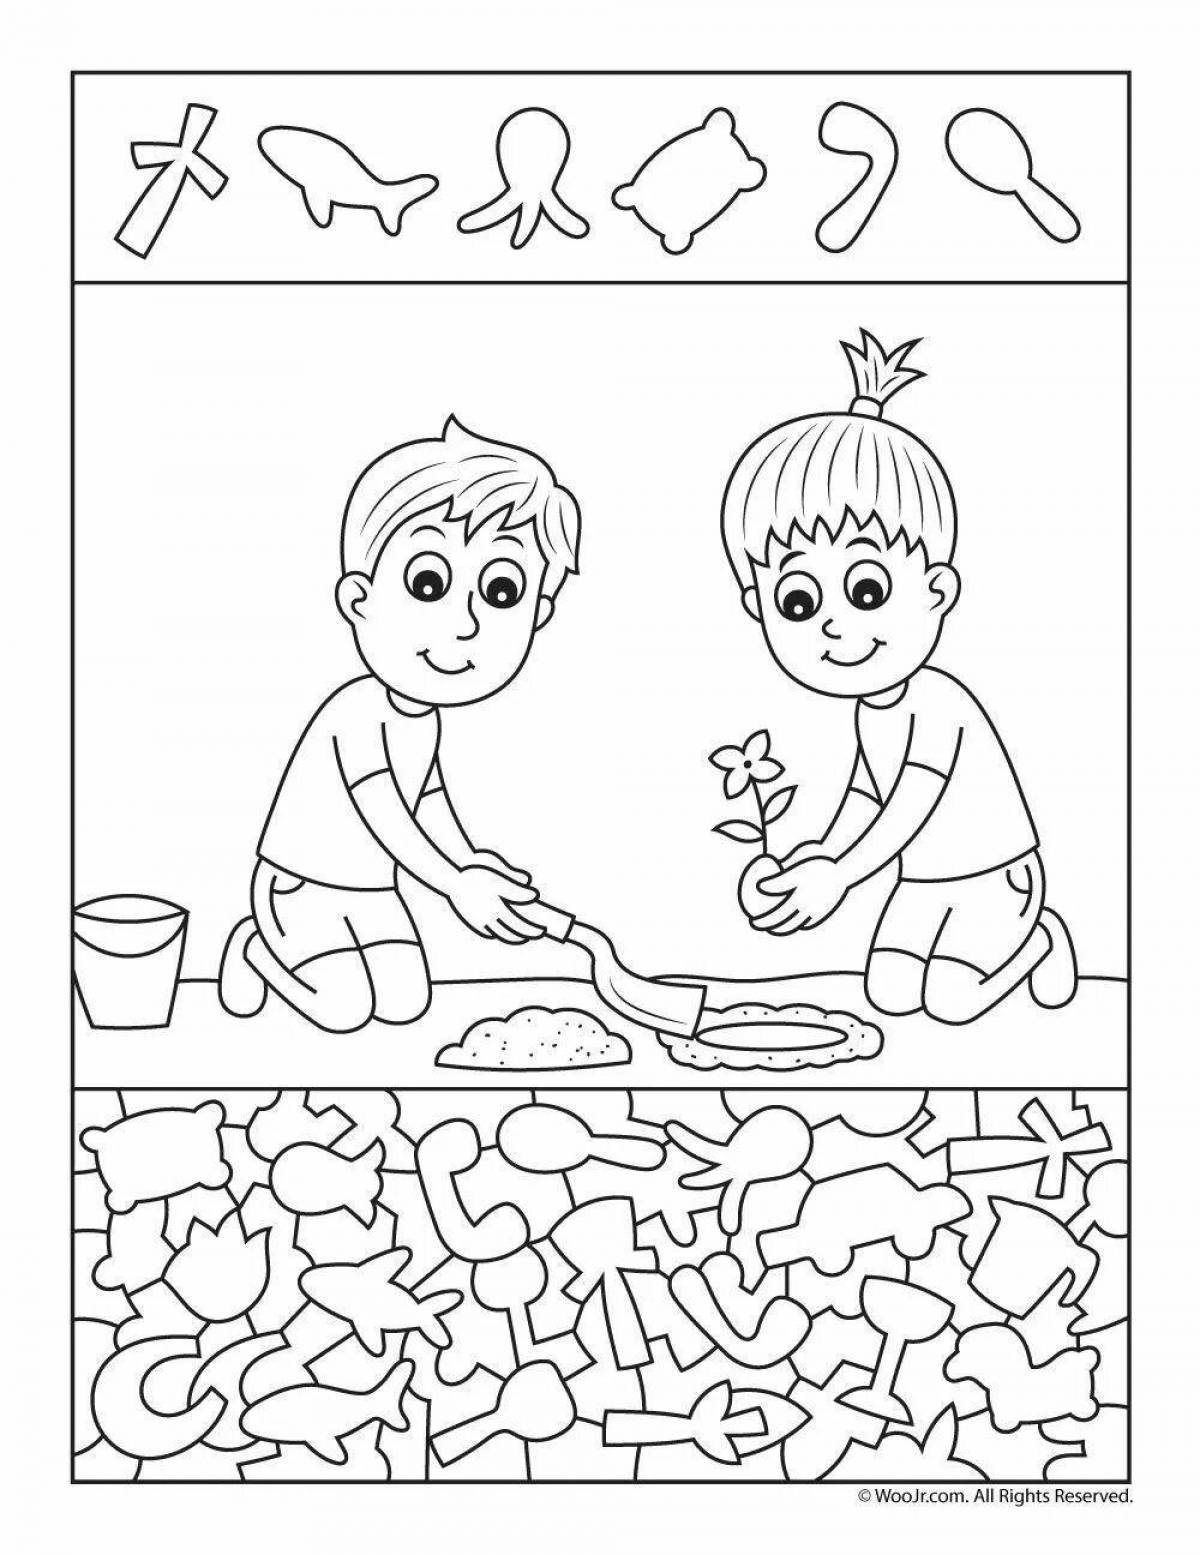 Fun coloring book to develop attention